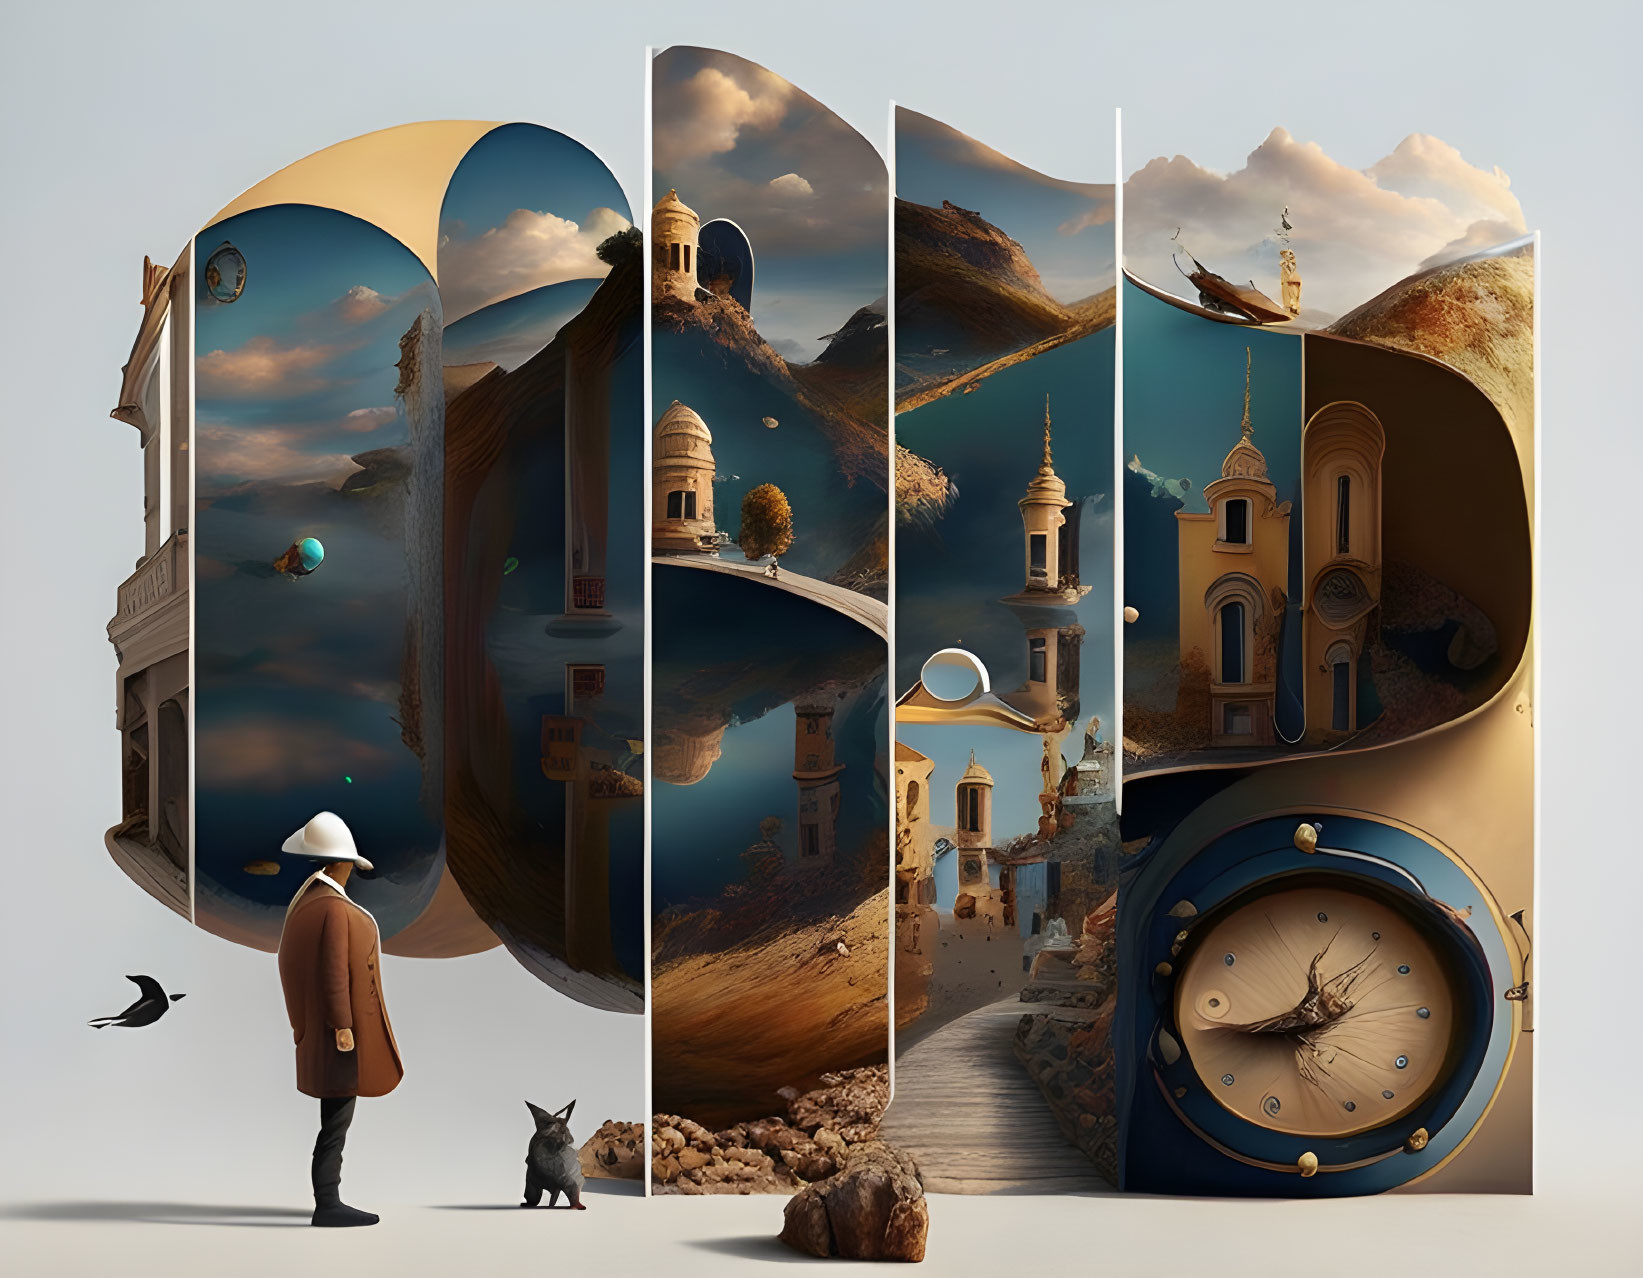 Person and cat view surreal desert landscape with architecture and clock.